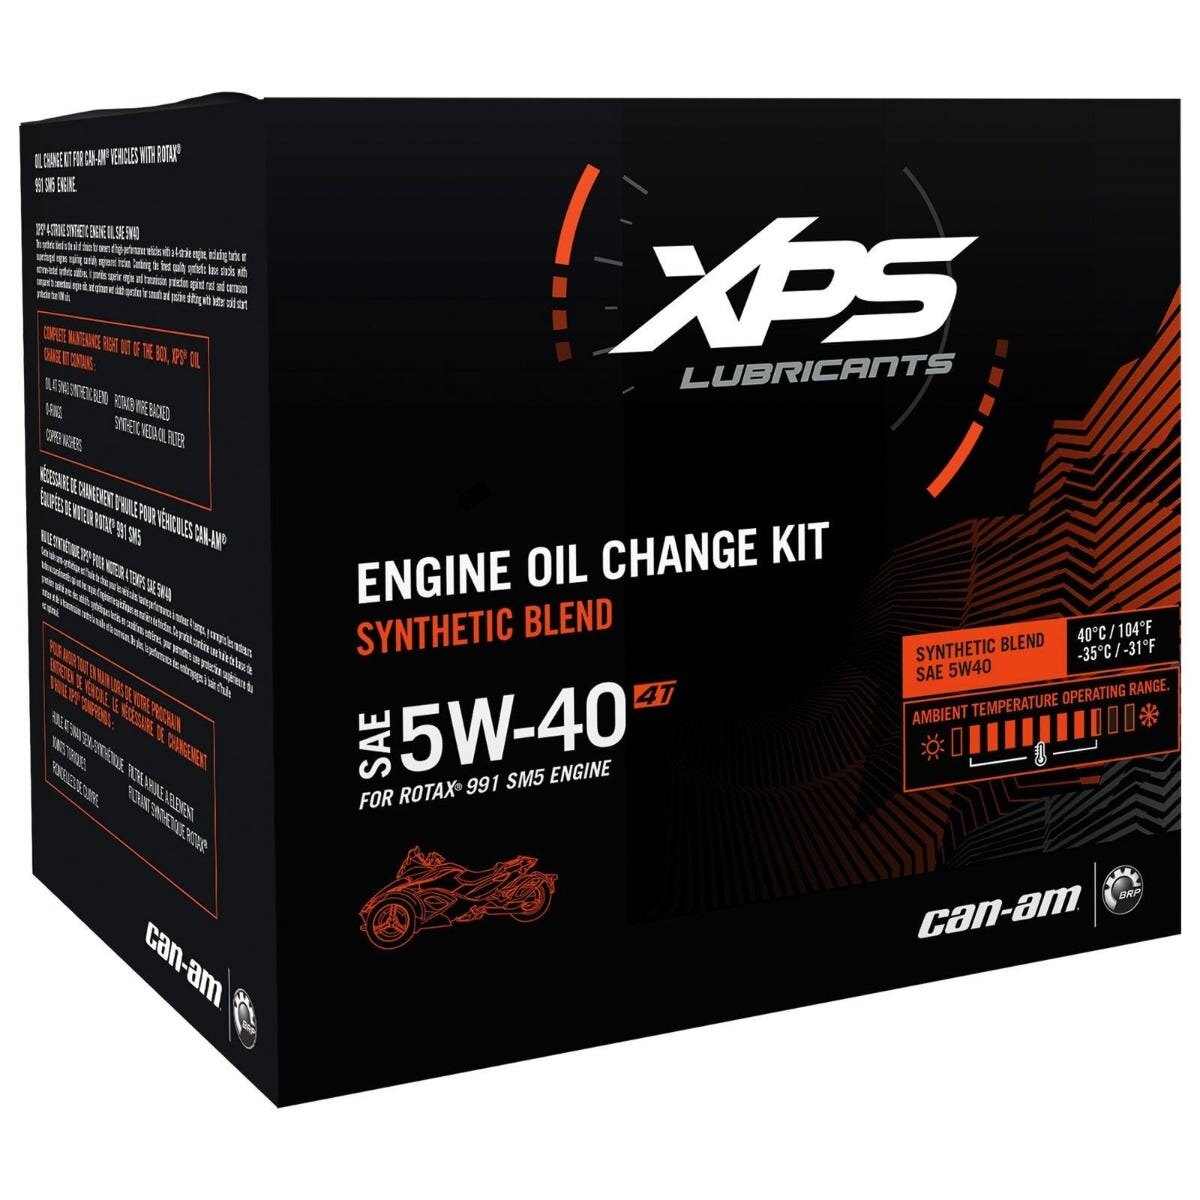 5W 40 Synthetic Blend Oil Change Kit for Can Am Spyder Rotax 991 (SM5) Engine